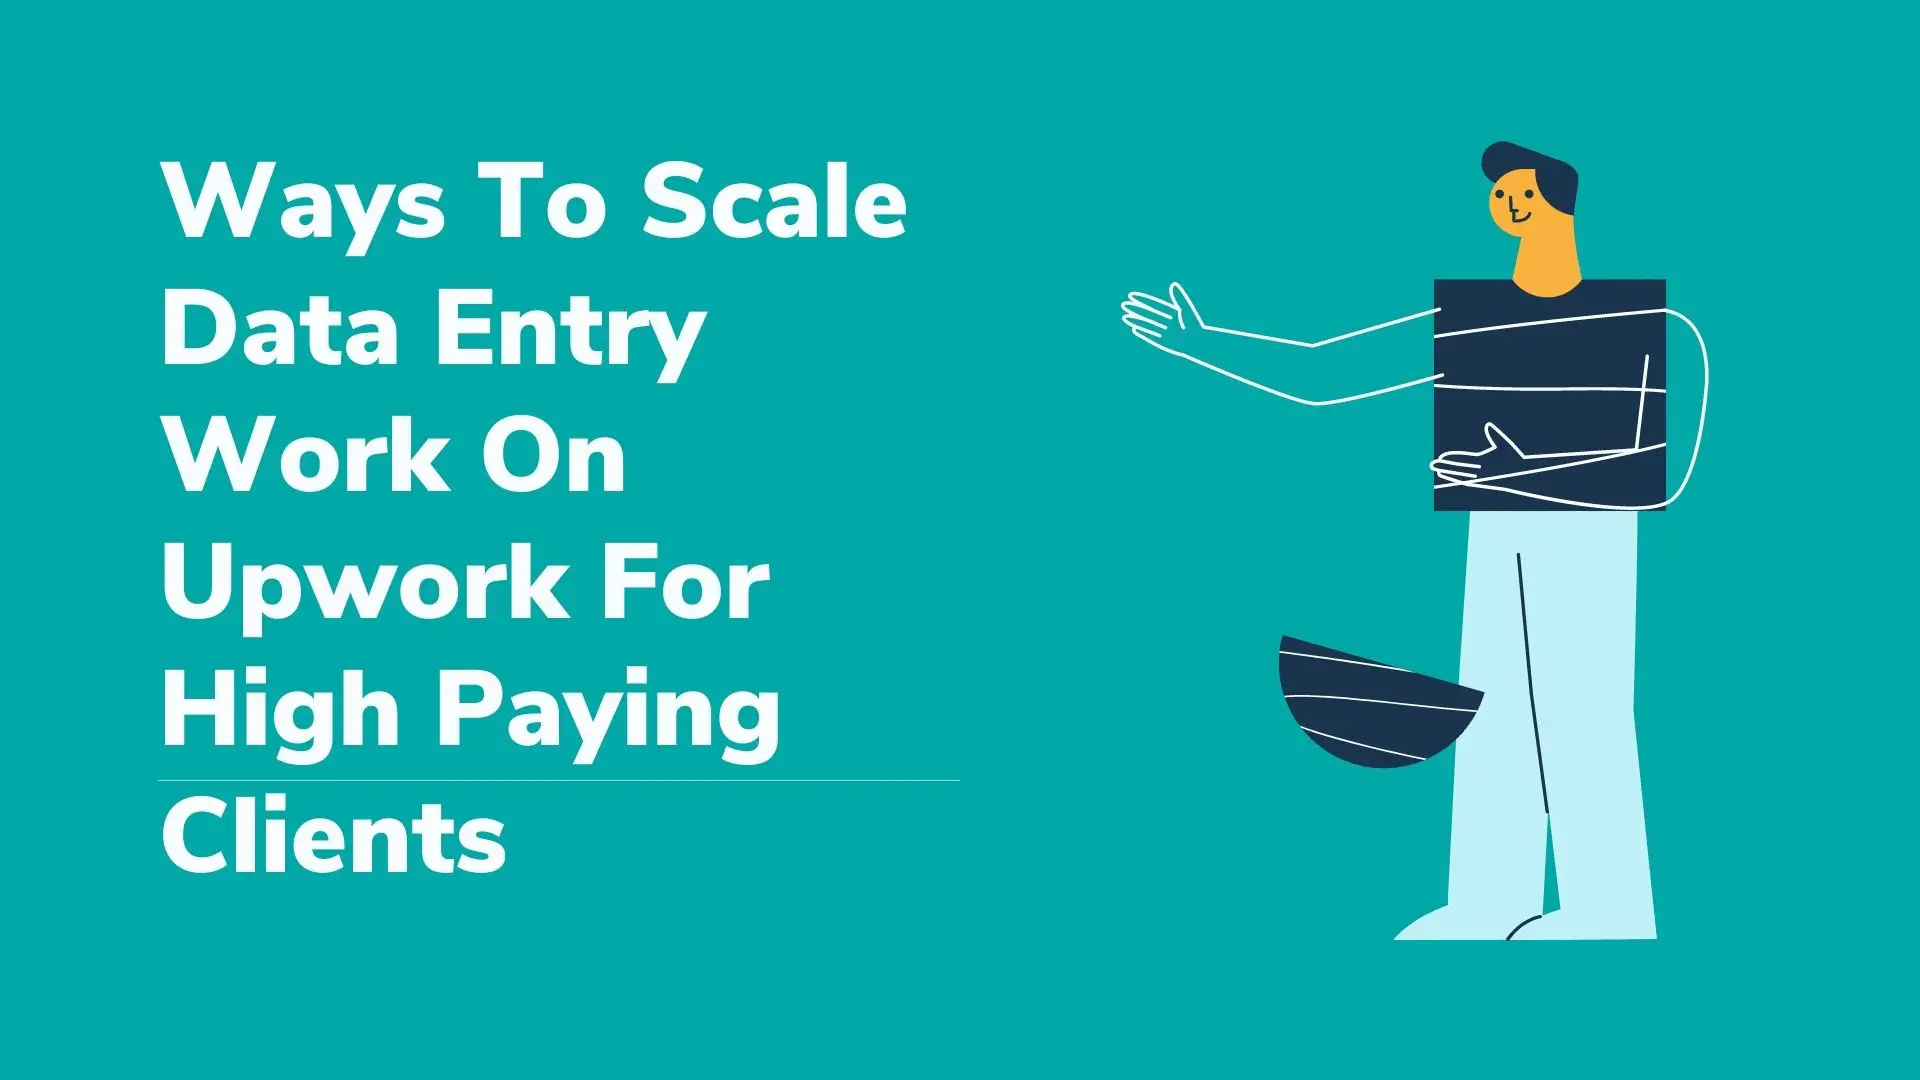 Ways To Scale Data Entry Work On Upwork For High Paying Clients